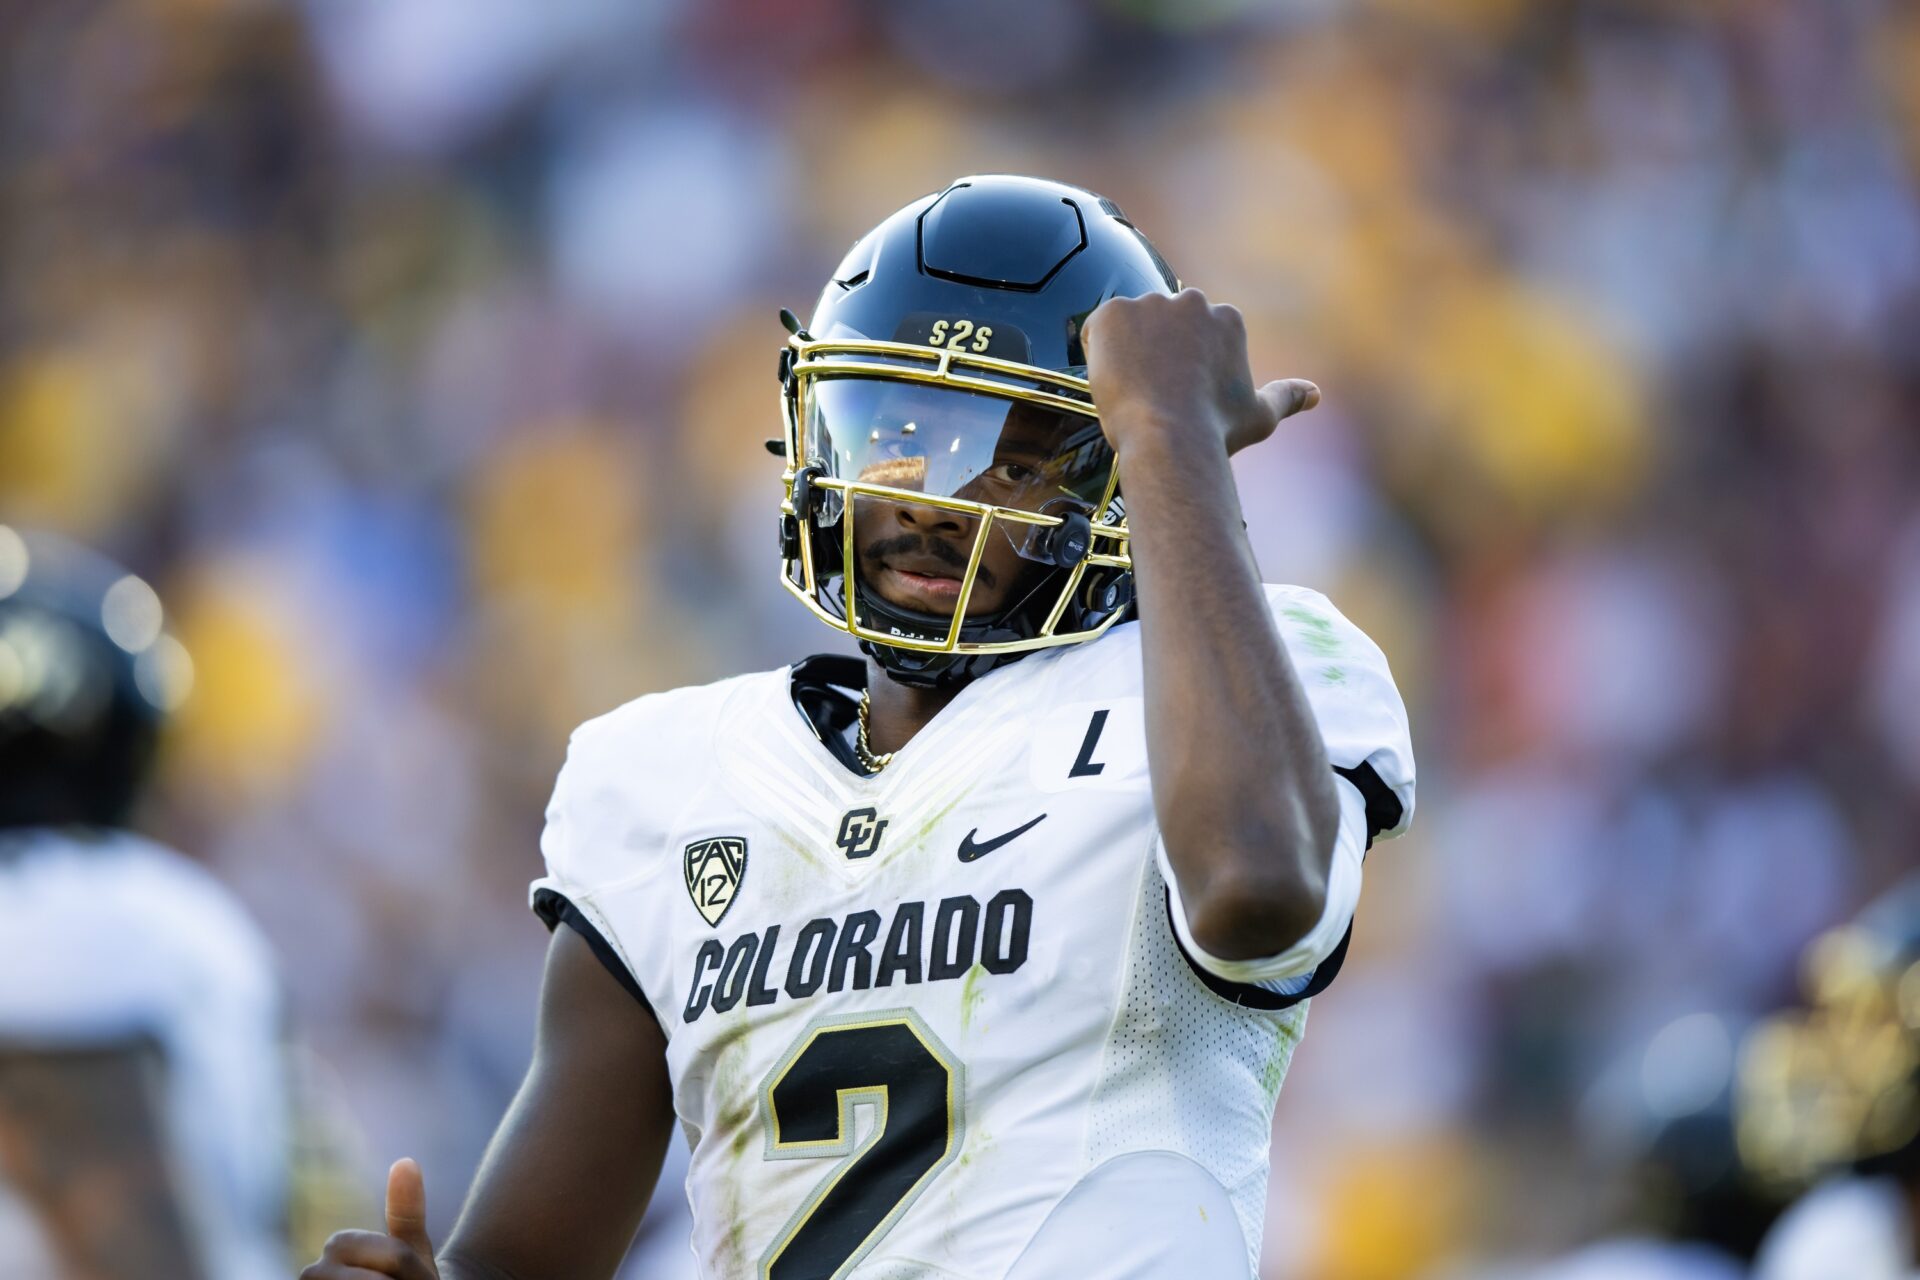 Shedeur Sanders (2) celebrates after scoring a touchdown against the Arizona State Sun Devils in the first half at Mountain America Stadium, Home of the ASU Sun Devils.